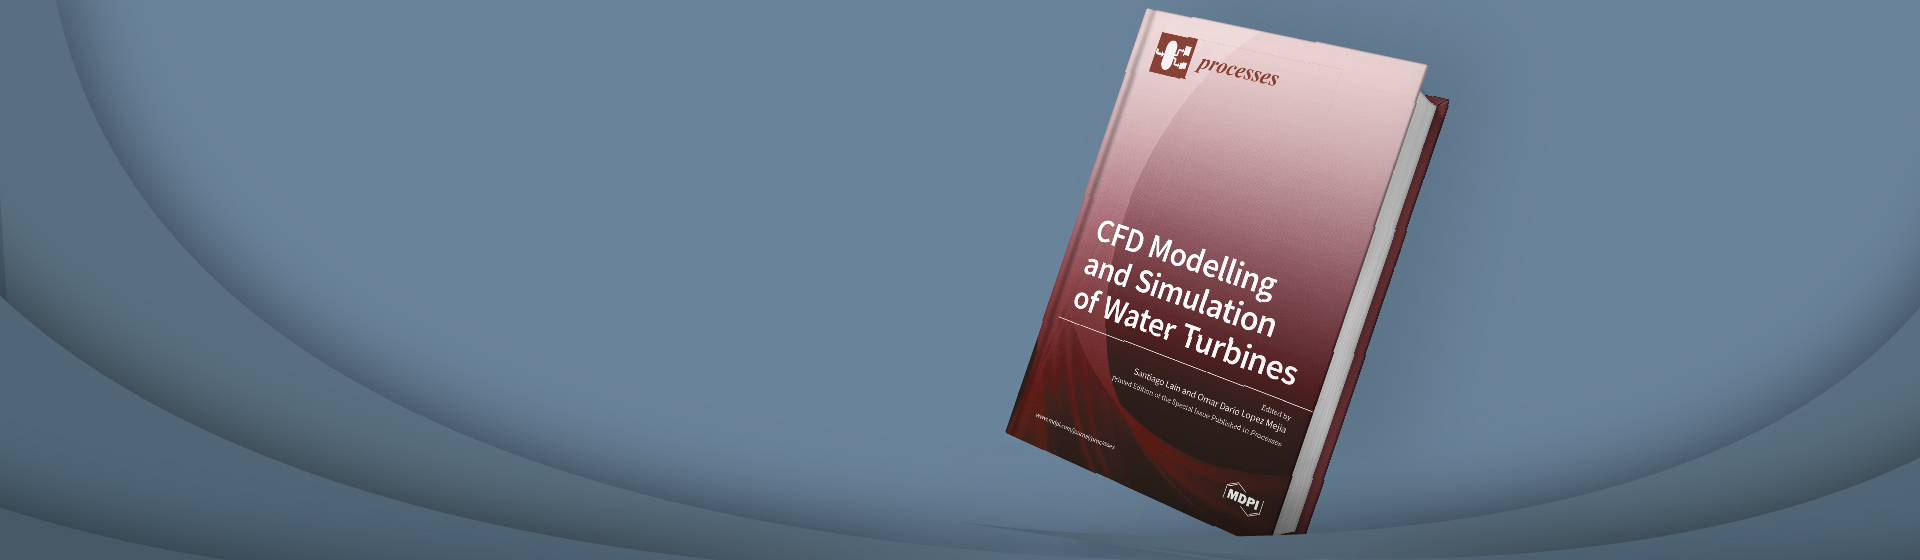 CFD Modelling and Simulation of Water Turbines